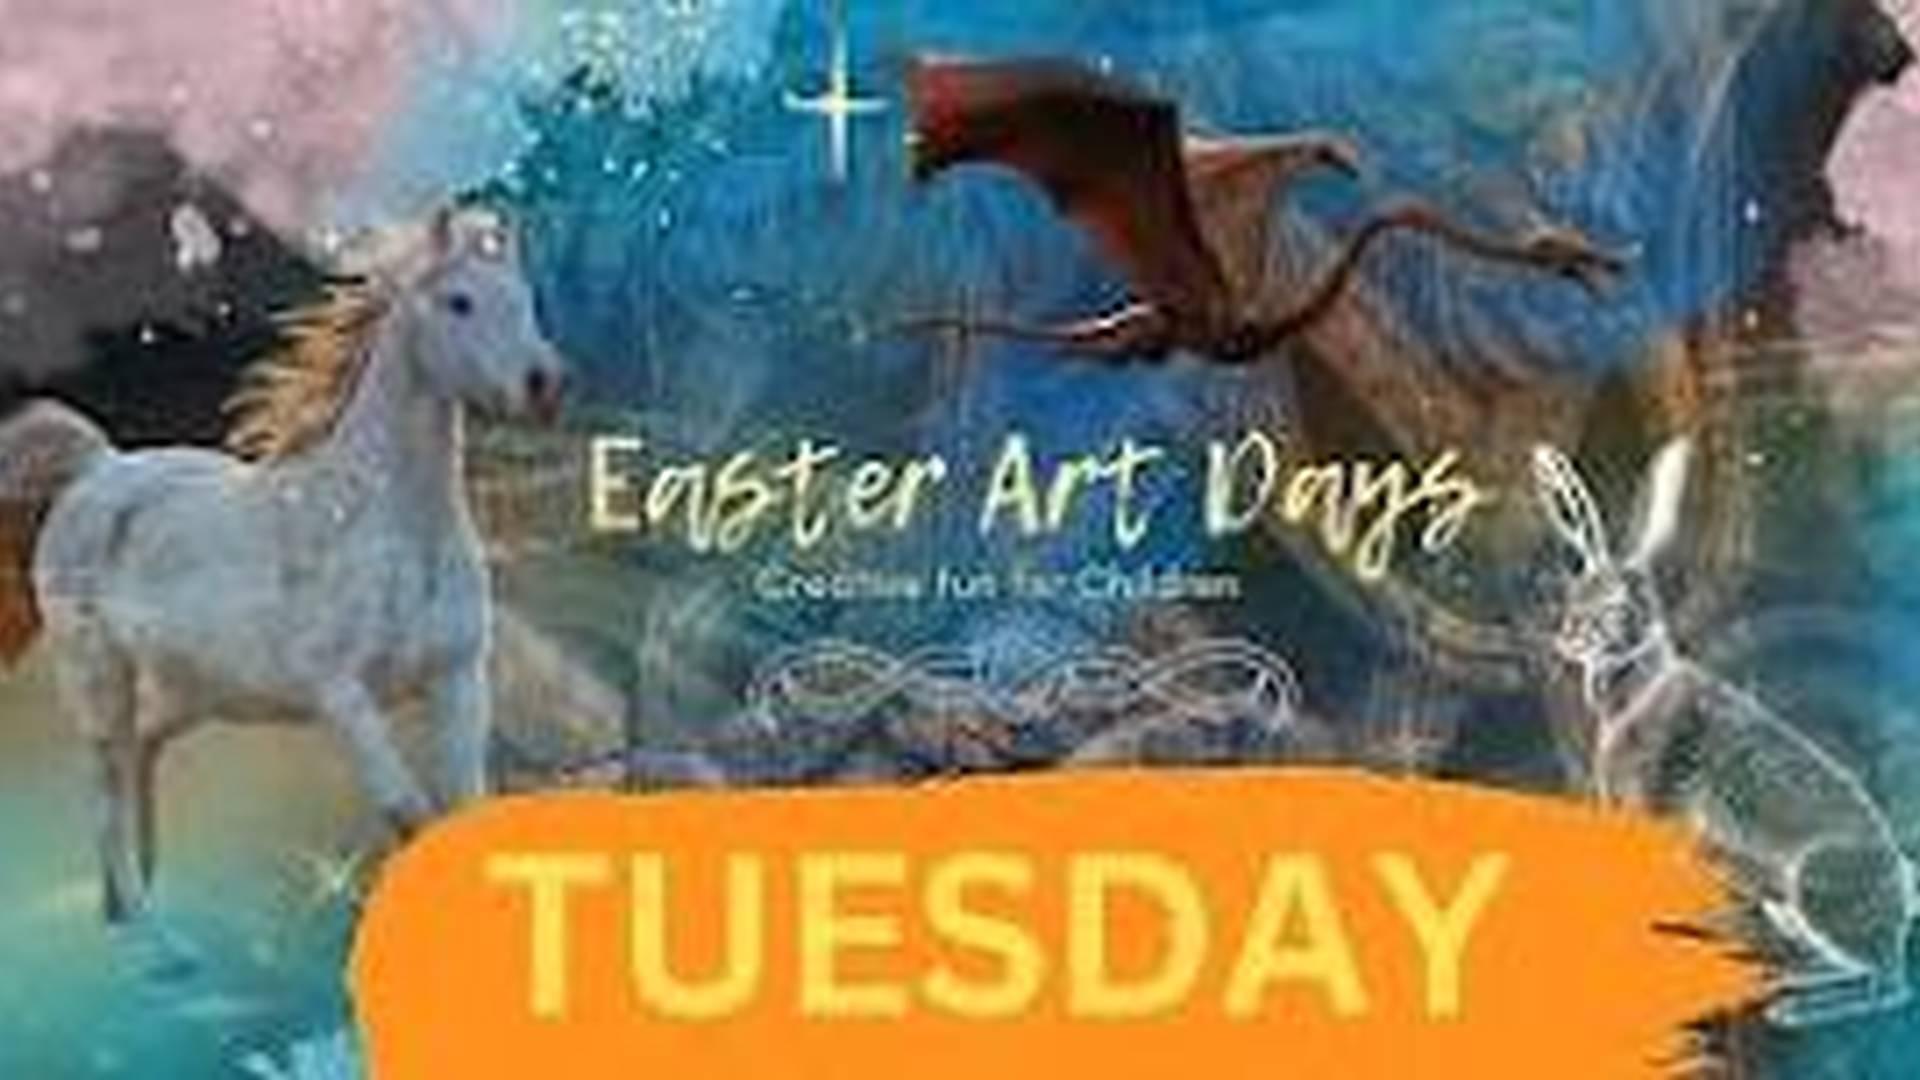 EASTER Magical Art Days - TUESDAY 9th April photo